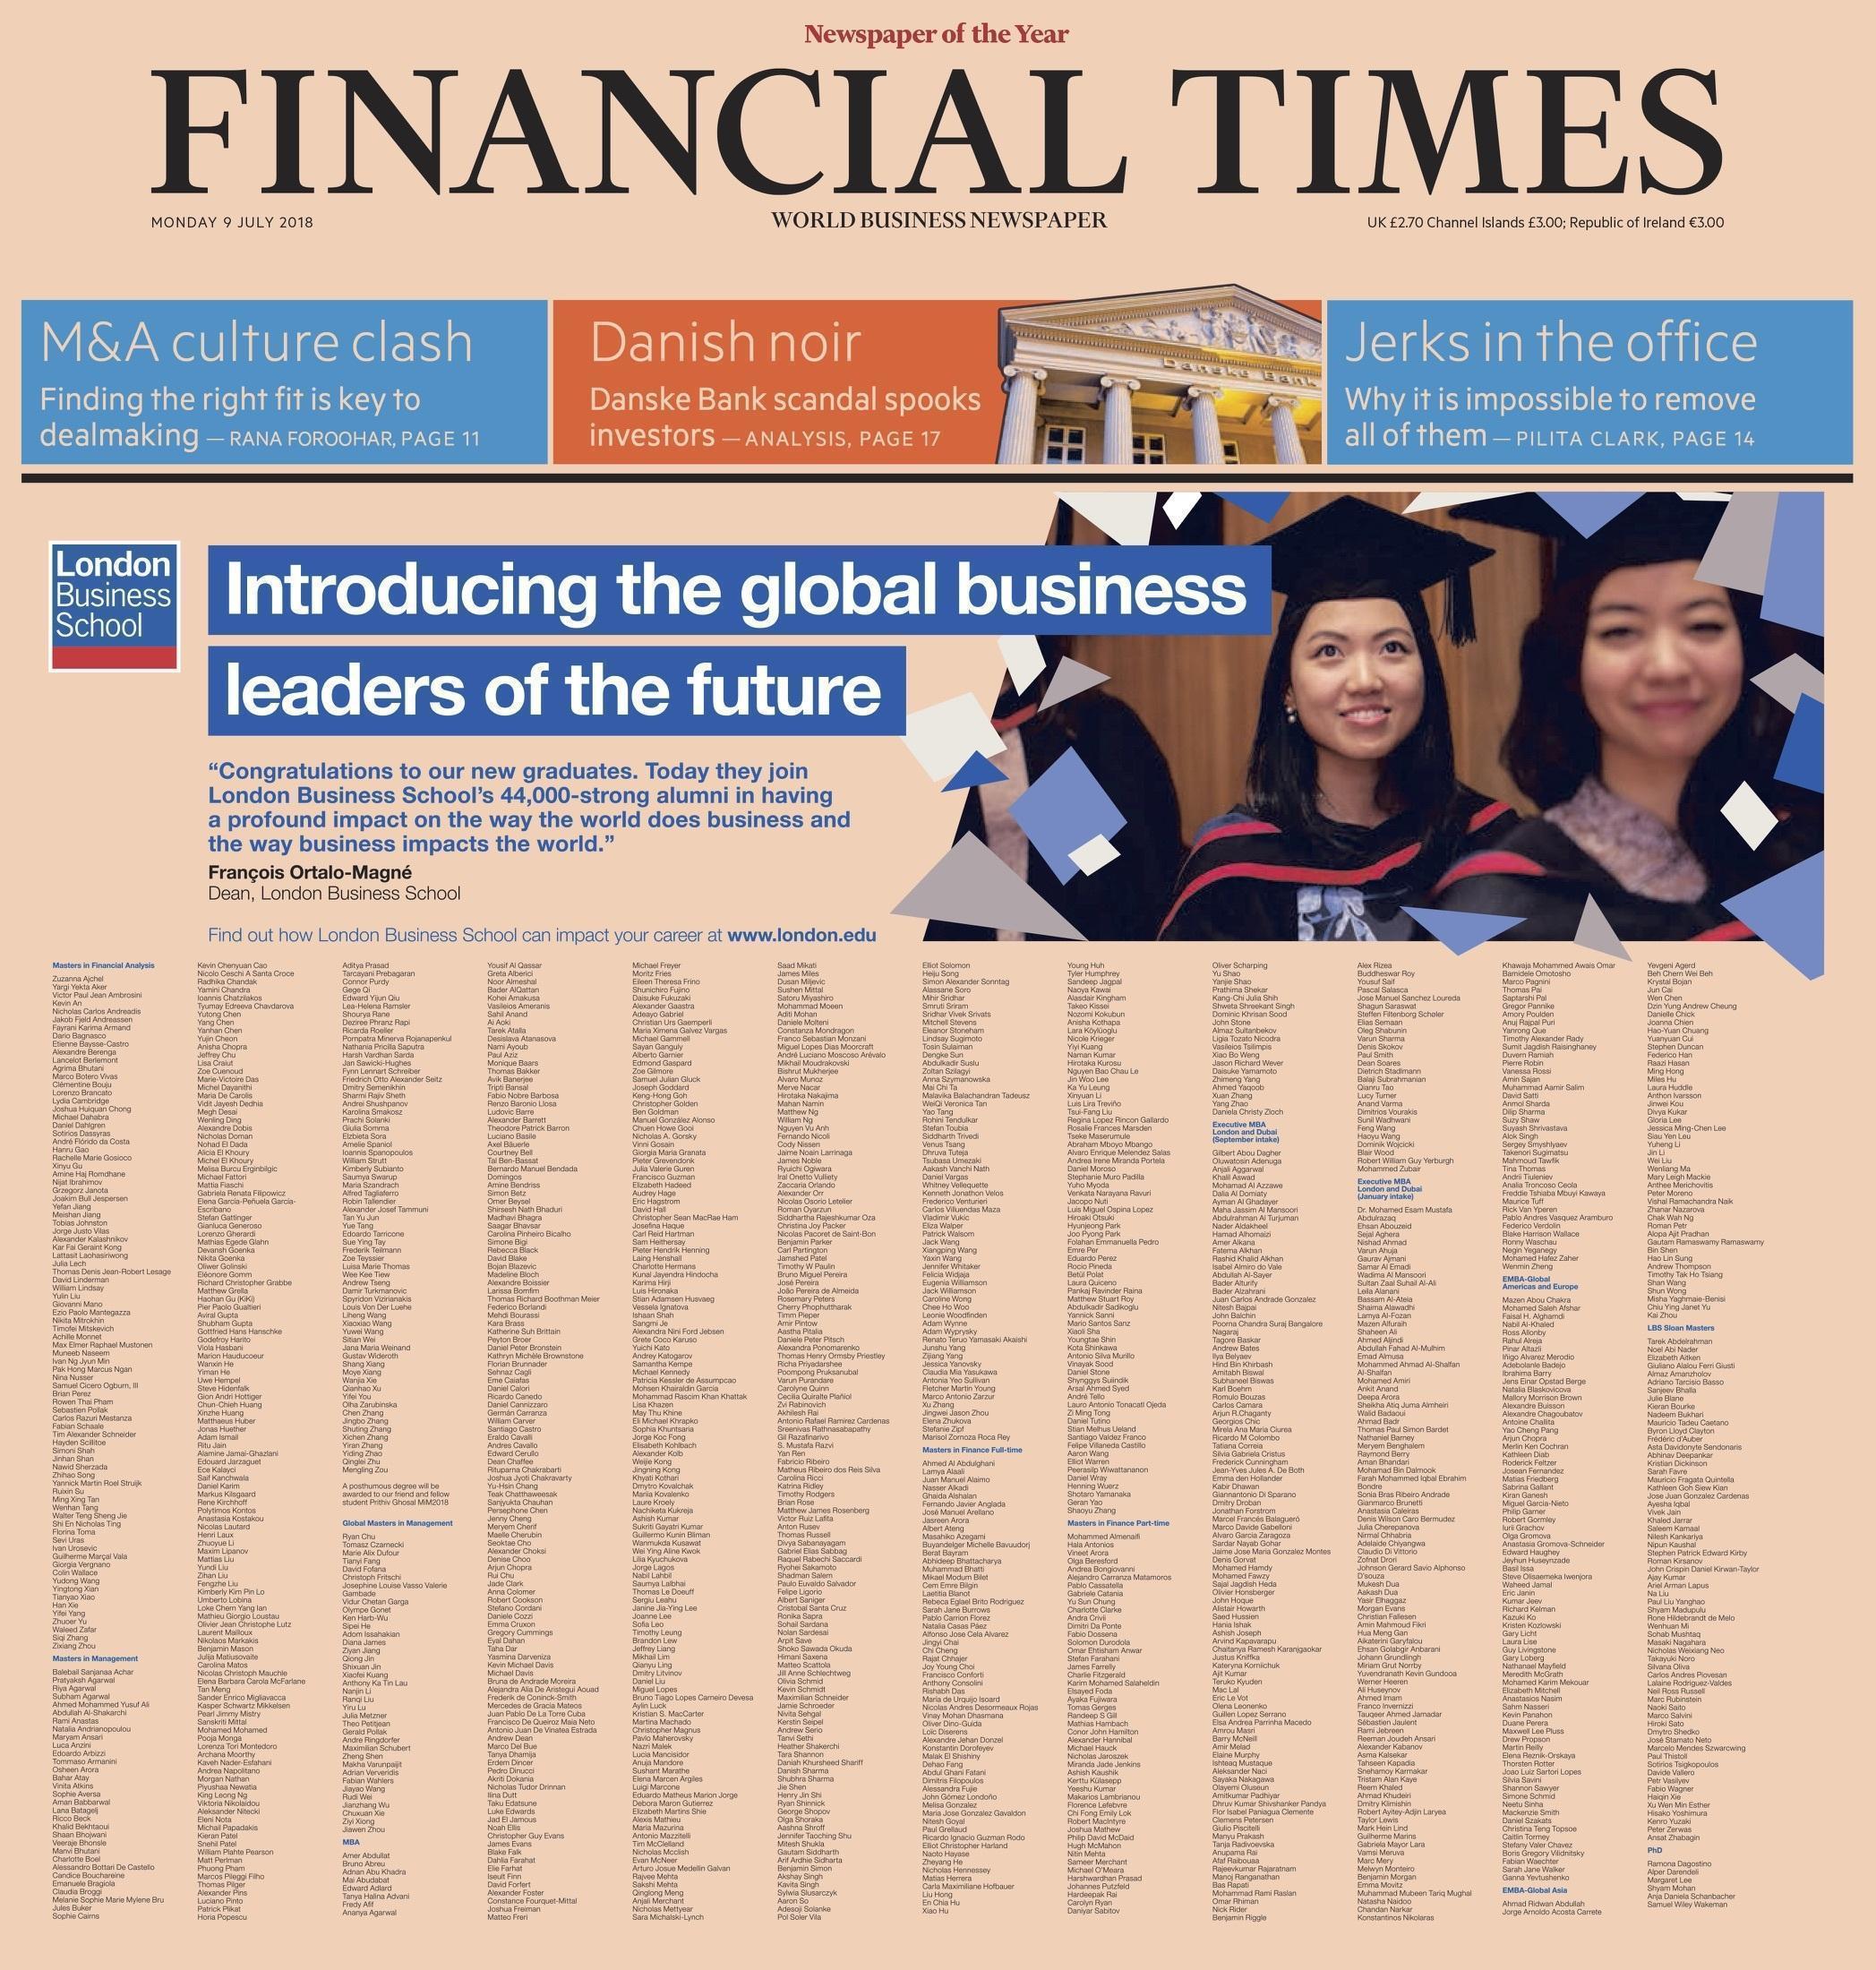 Financial Times feature